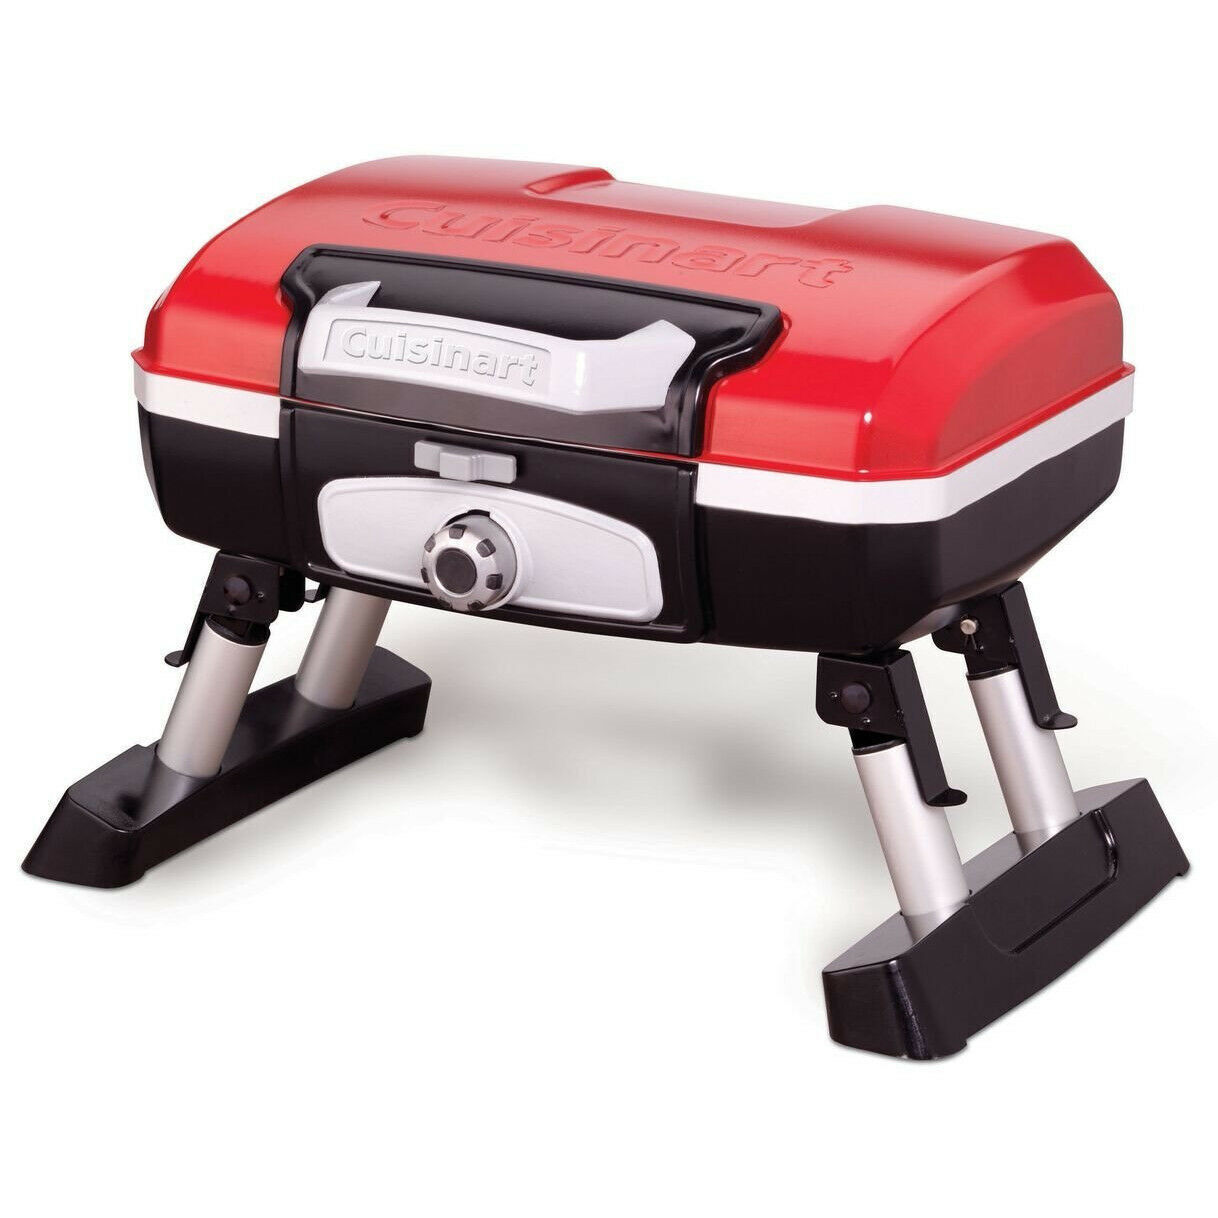 Red Table Top Gas Grill 5500 Btu Propane Portable Folding Camping Bbq Cooker New